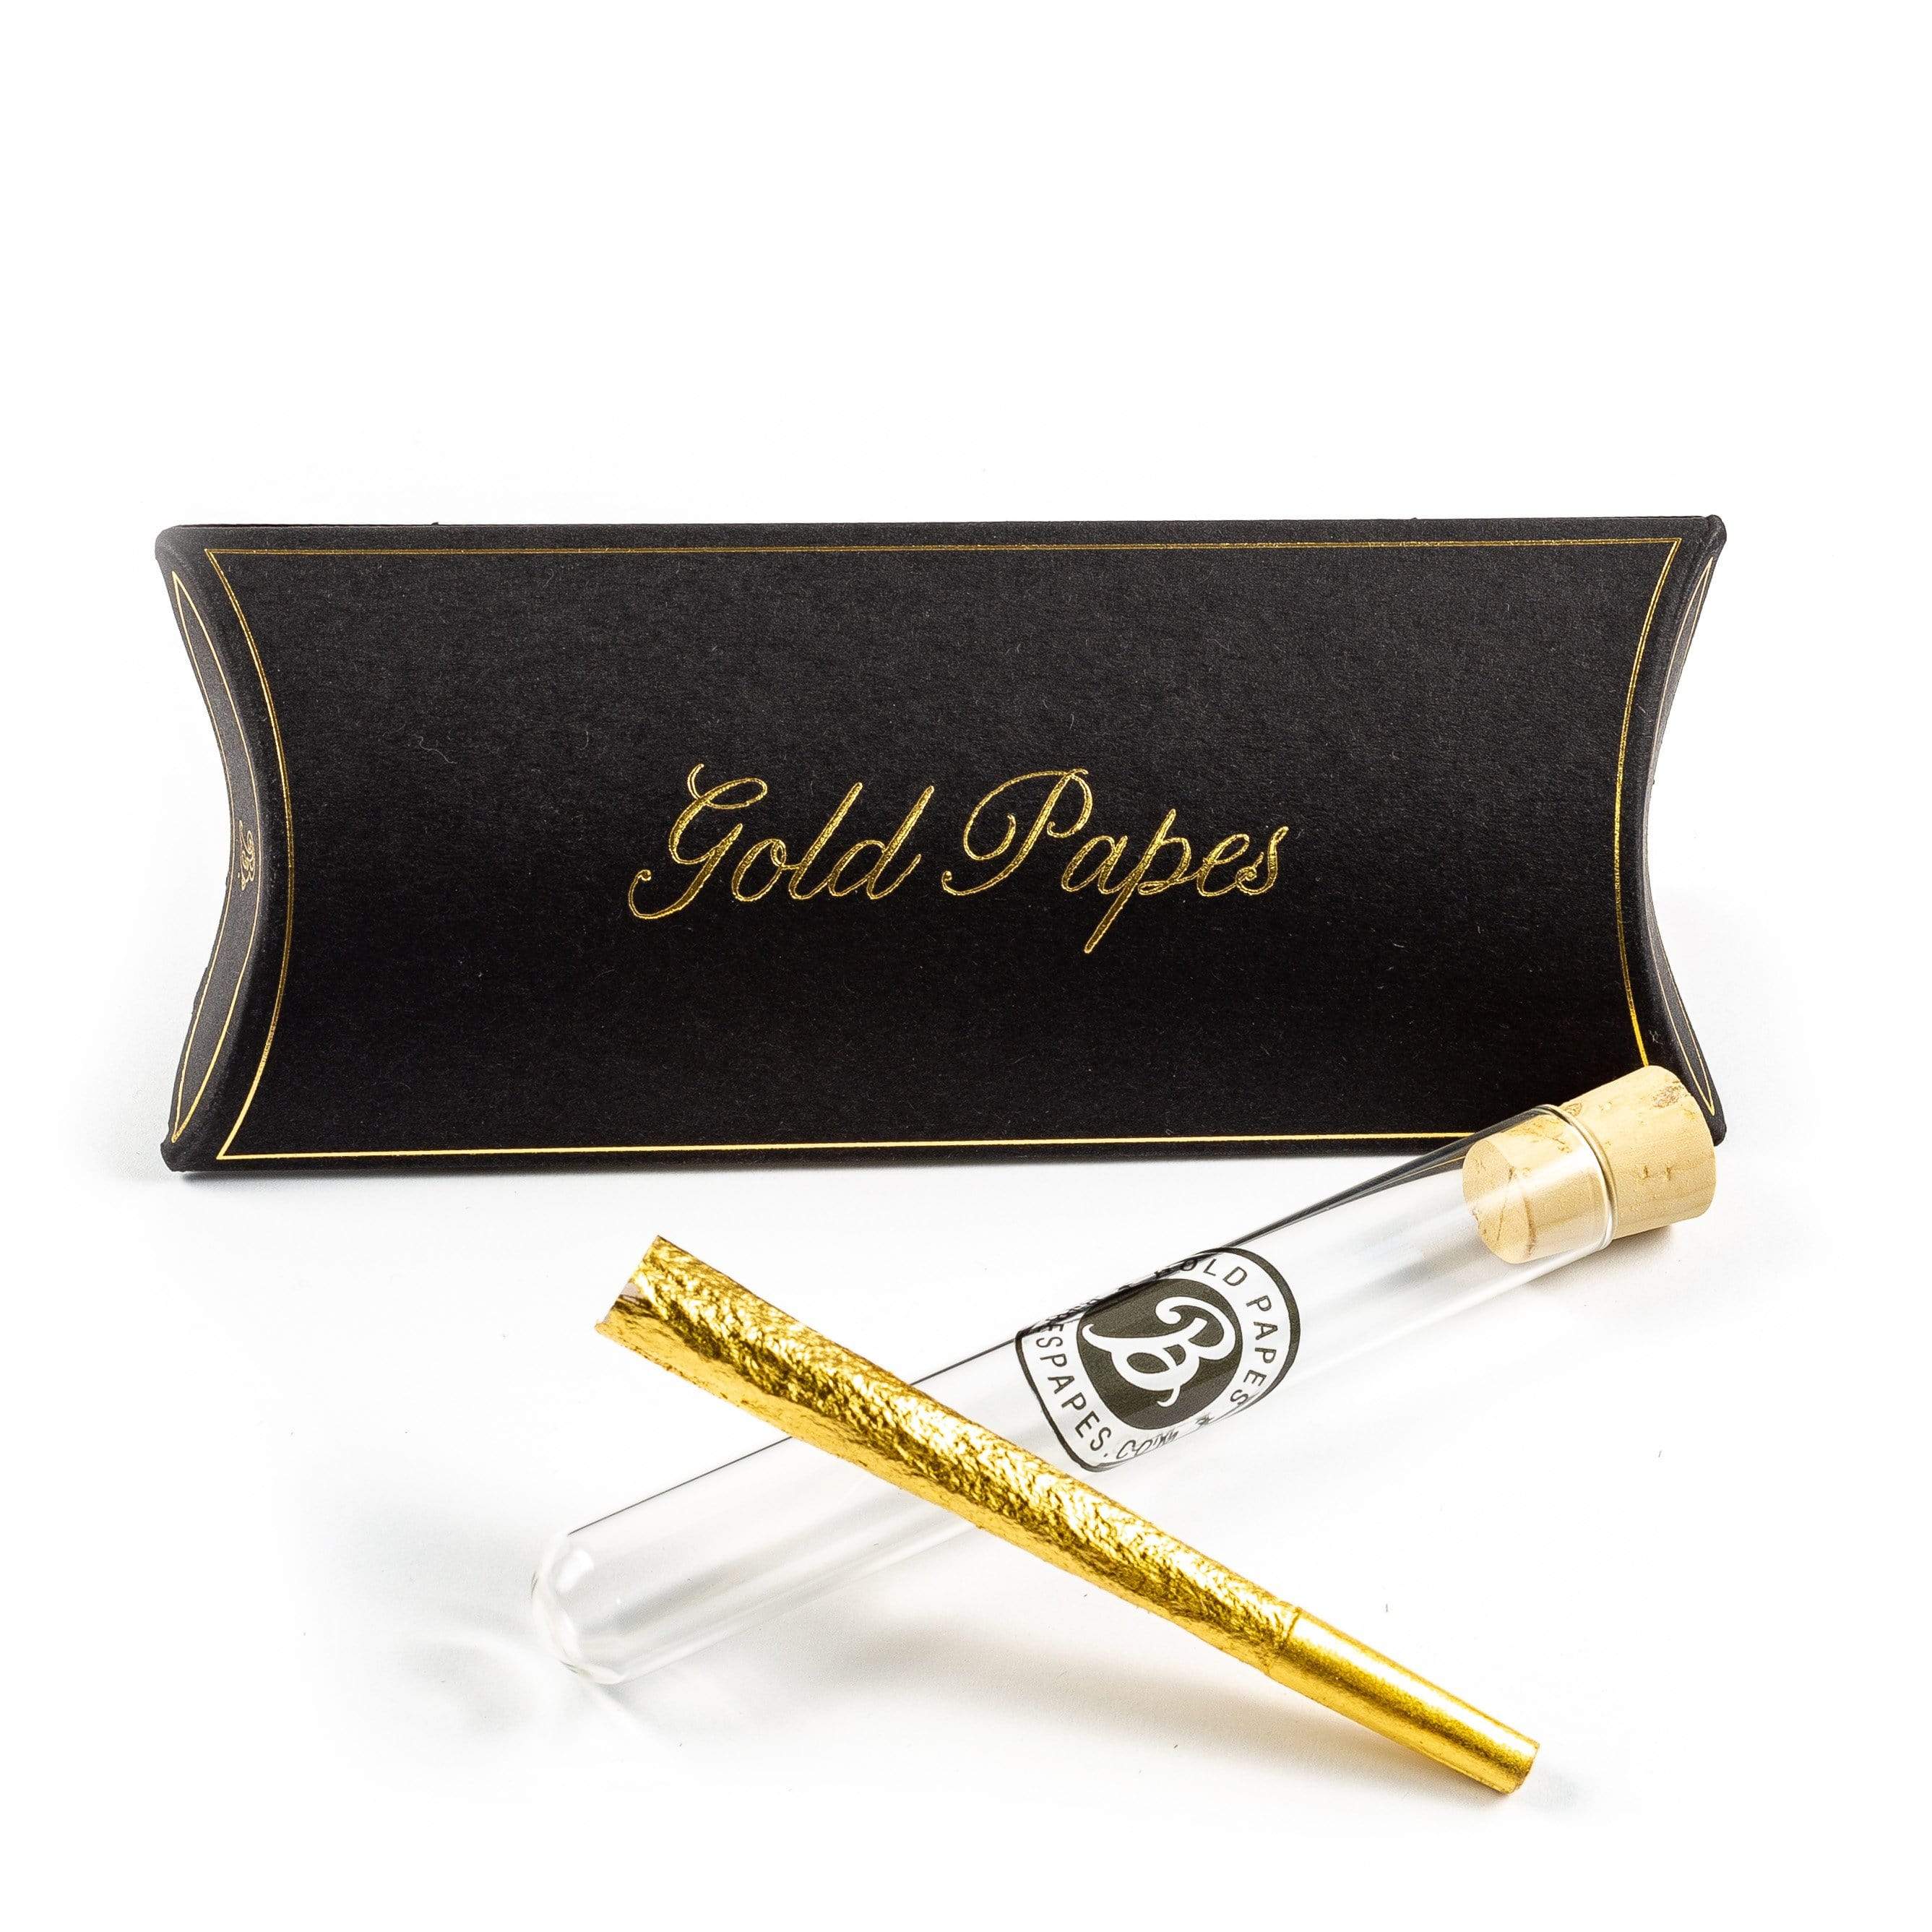 Gold Papes Pre Rolled Cone with a stylish tube